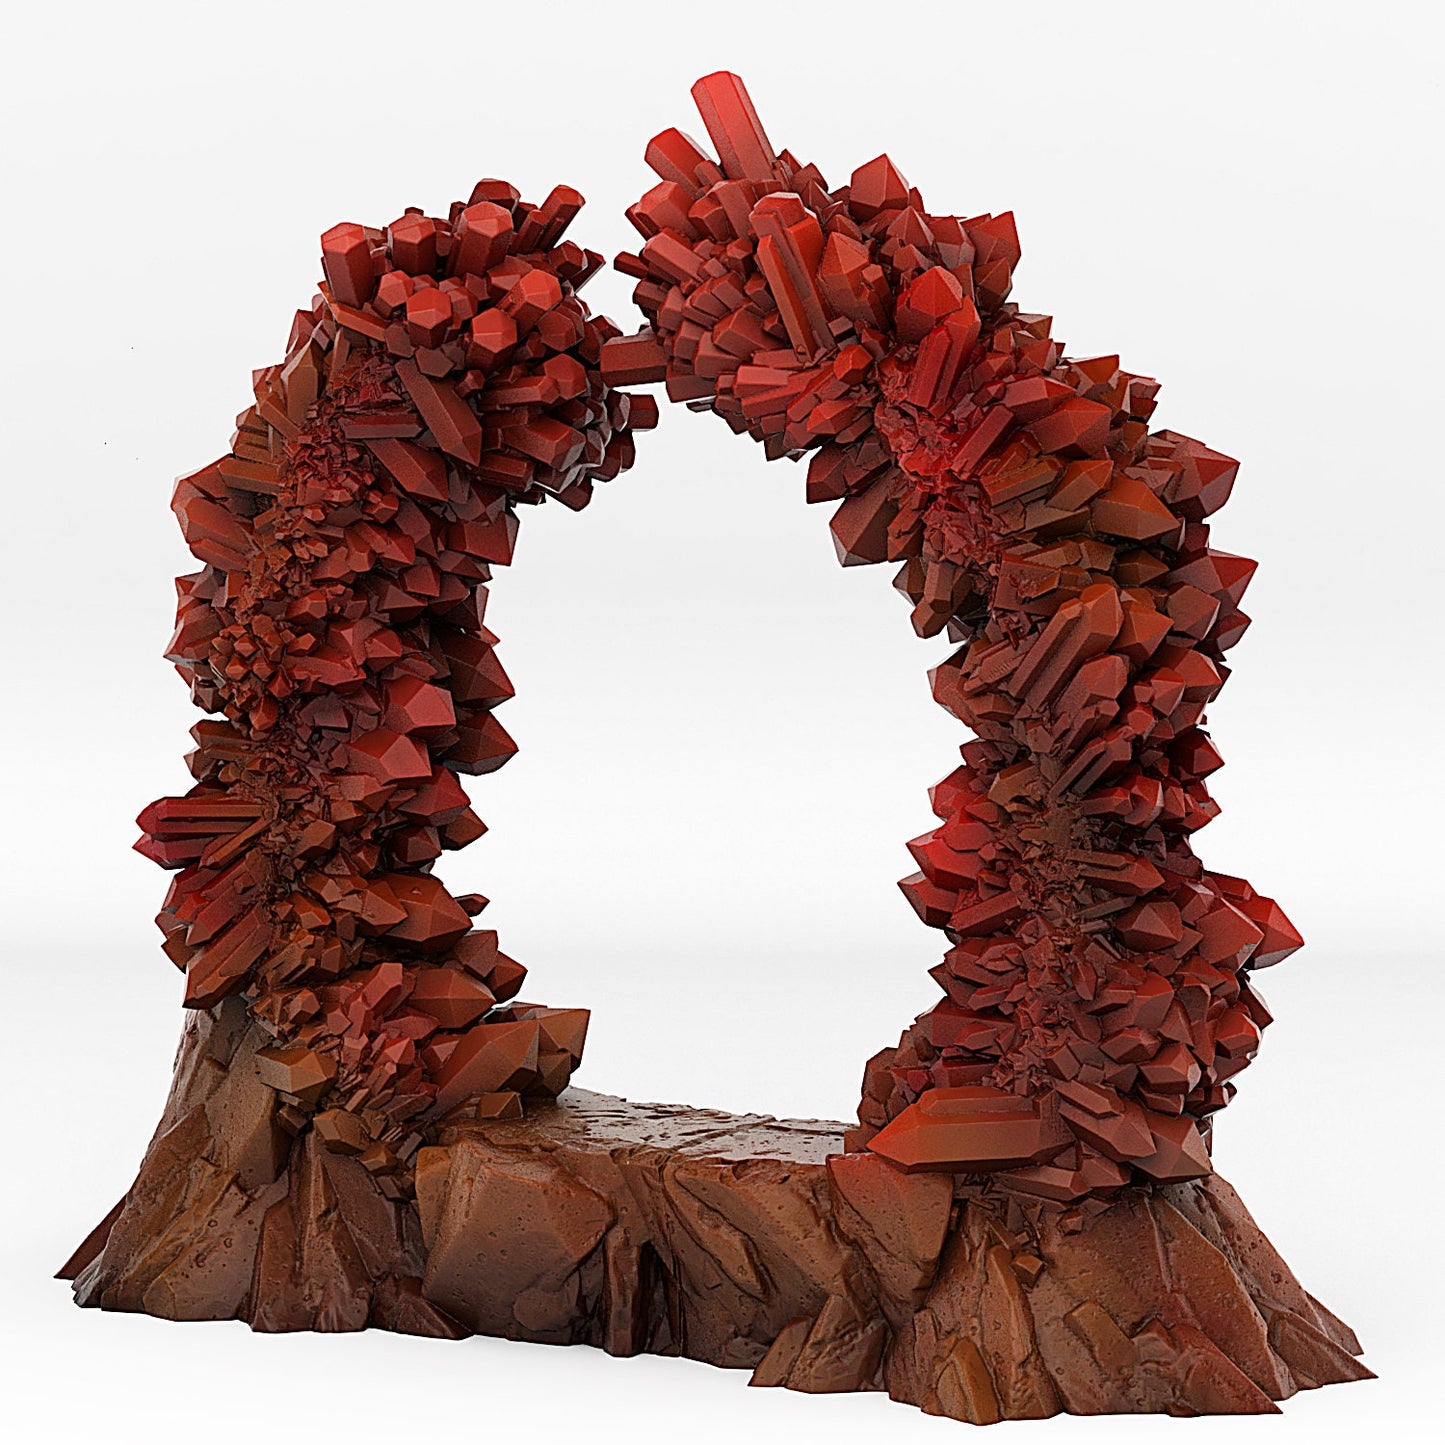 Crystal Portal | Scenery and terrain | 3D Printed Resin Miniature | Tabletop Role Playing | AoS | D&D | 40K | Pathfinder